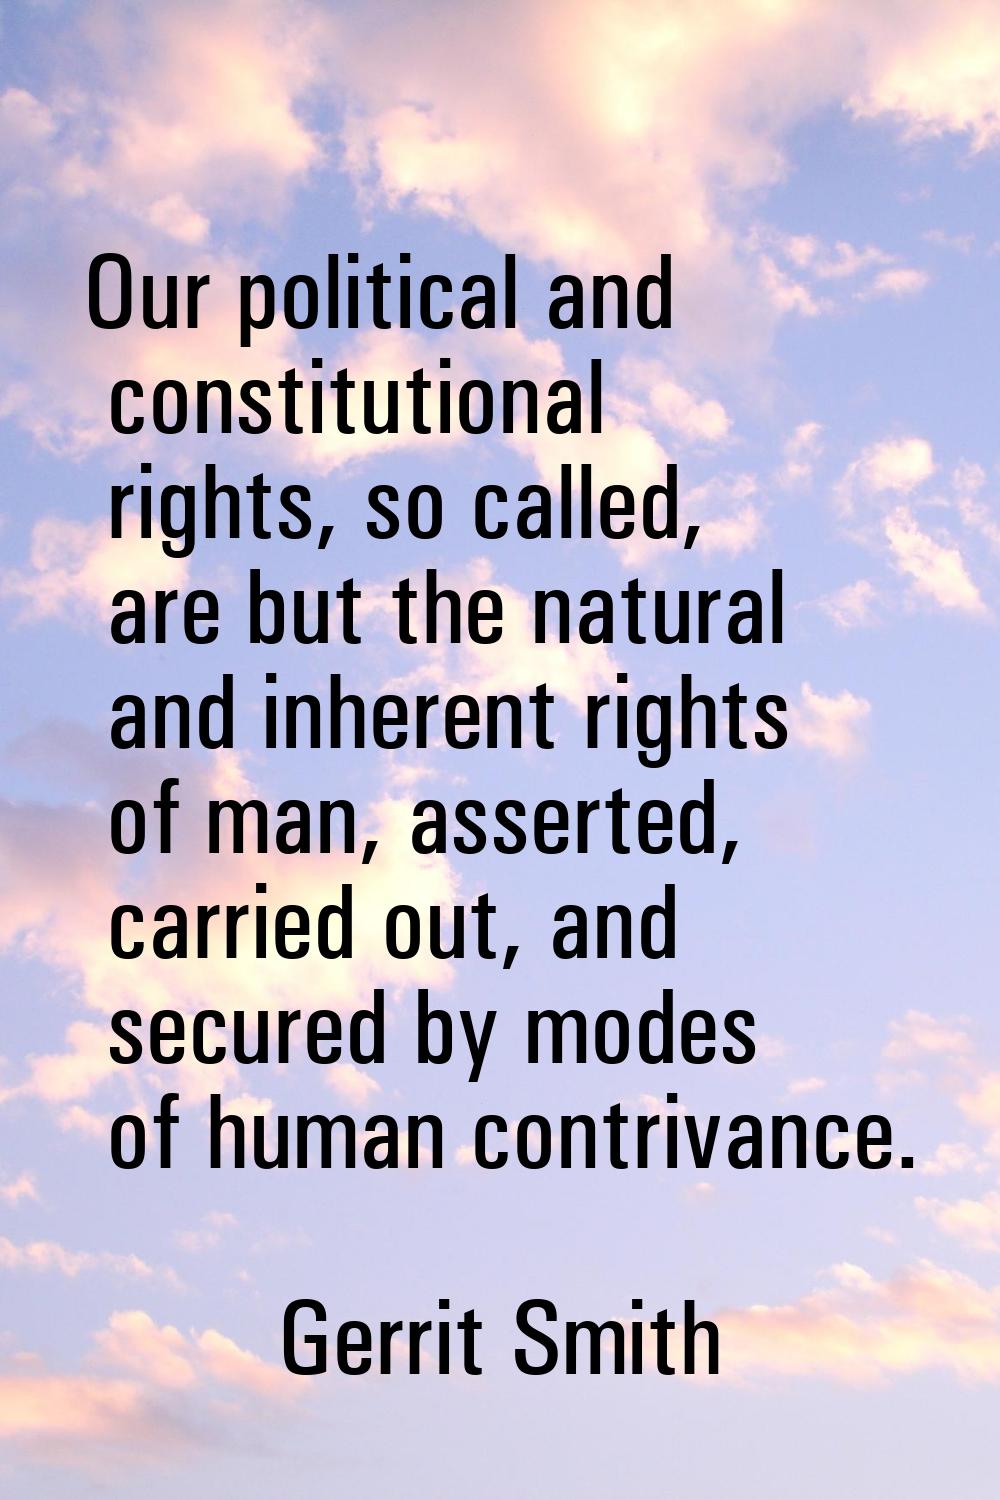 Our political and constitutional rights, so called, are but the natural and inherent rights of man,